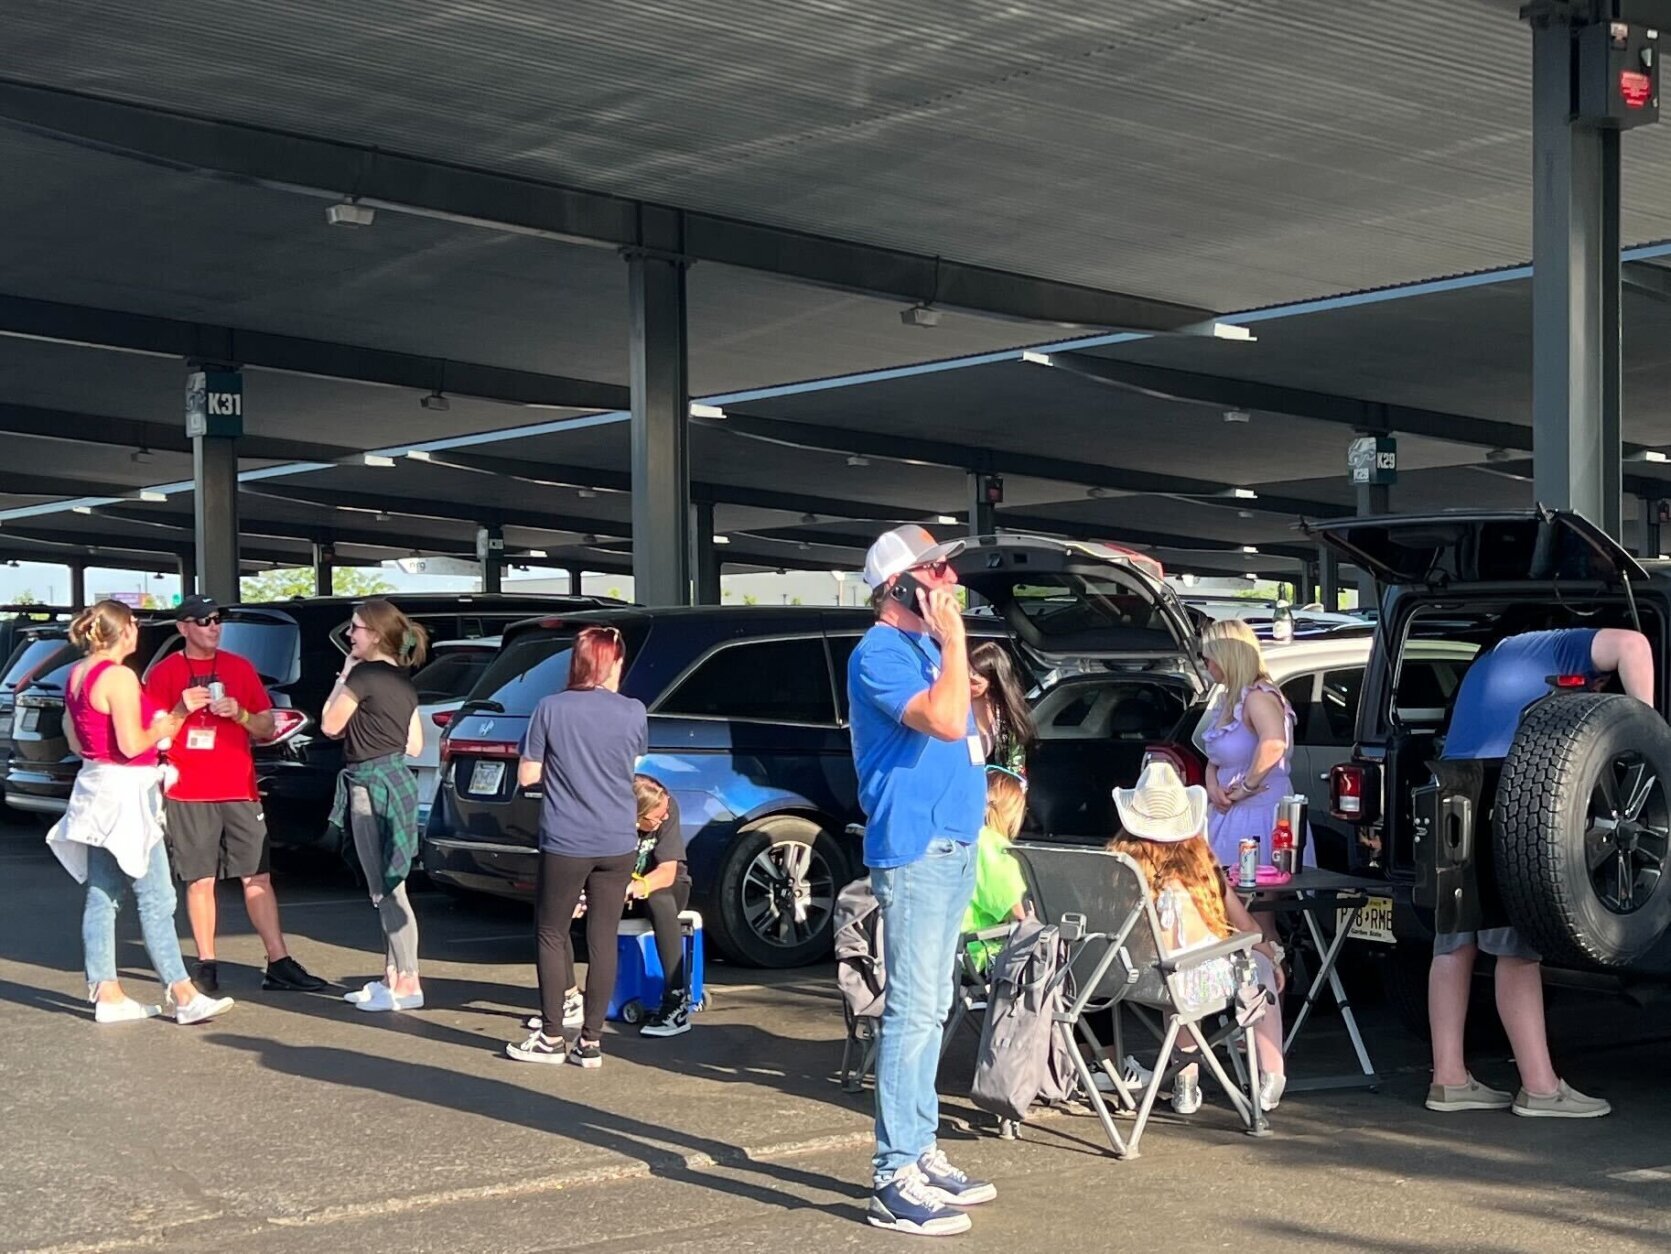 <p>Not everyone in the parking lot had tickets for the show. Some showed up hoping to buy last minute tickets while others sat outside to listen to the concert.</p>
